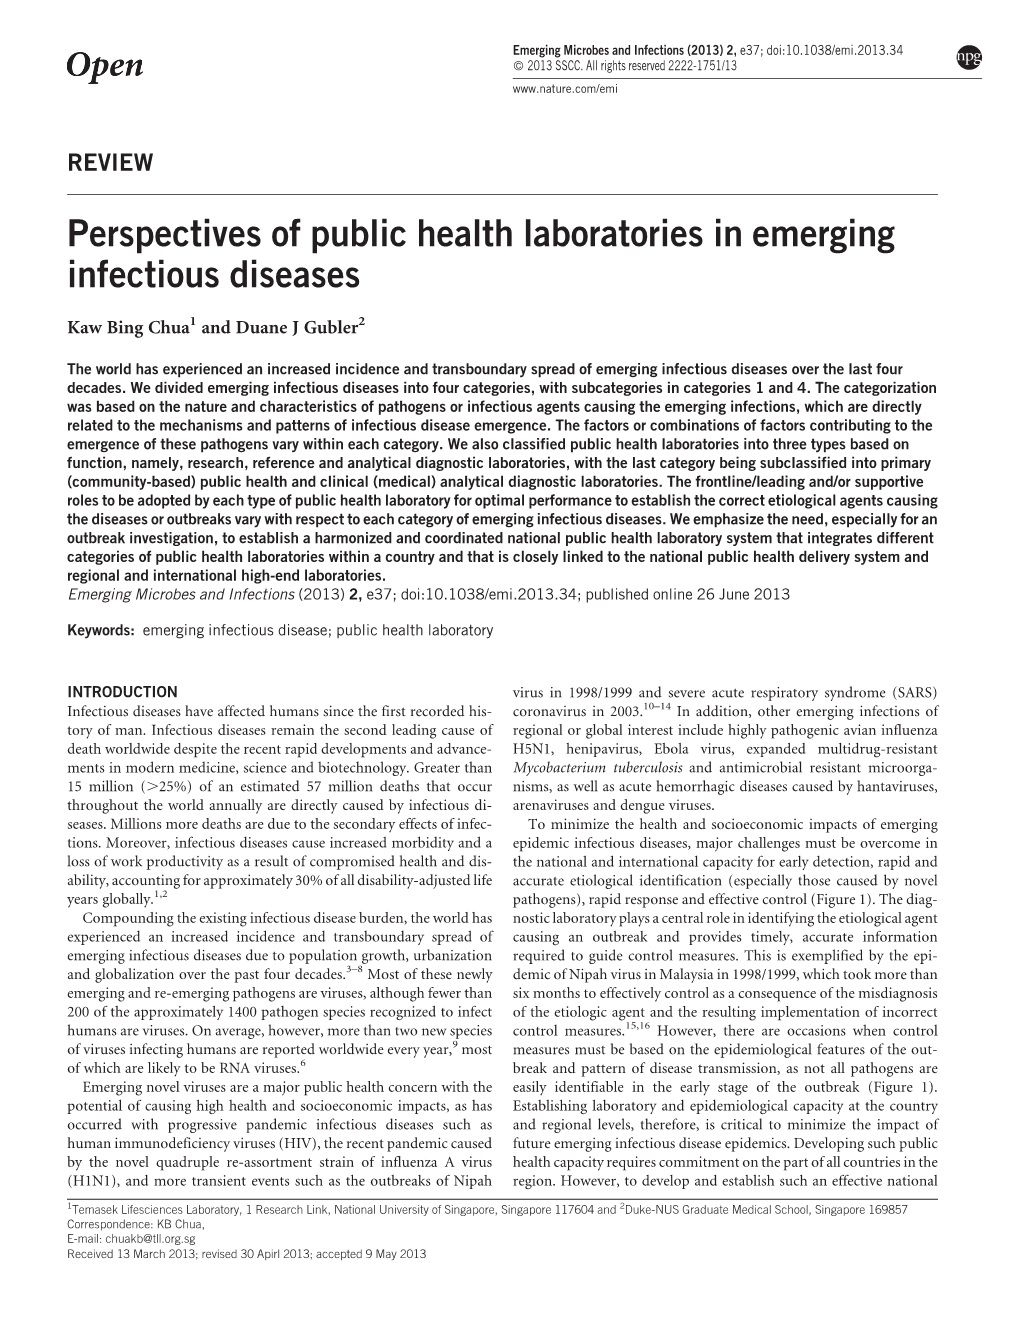 Perspectives of Public Health Laboratories in Emerging Infectious Diseases